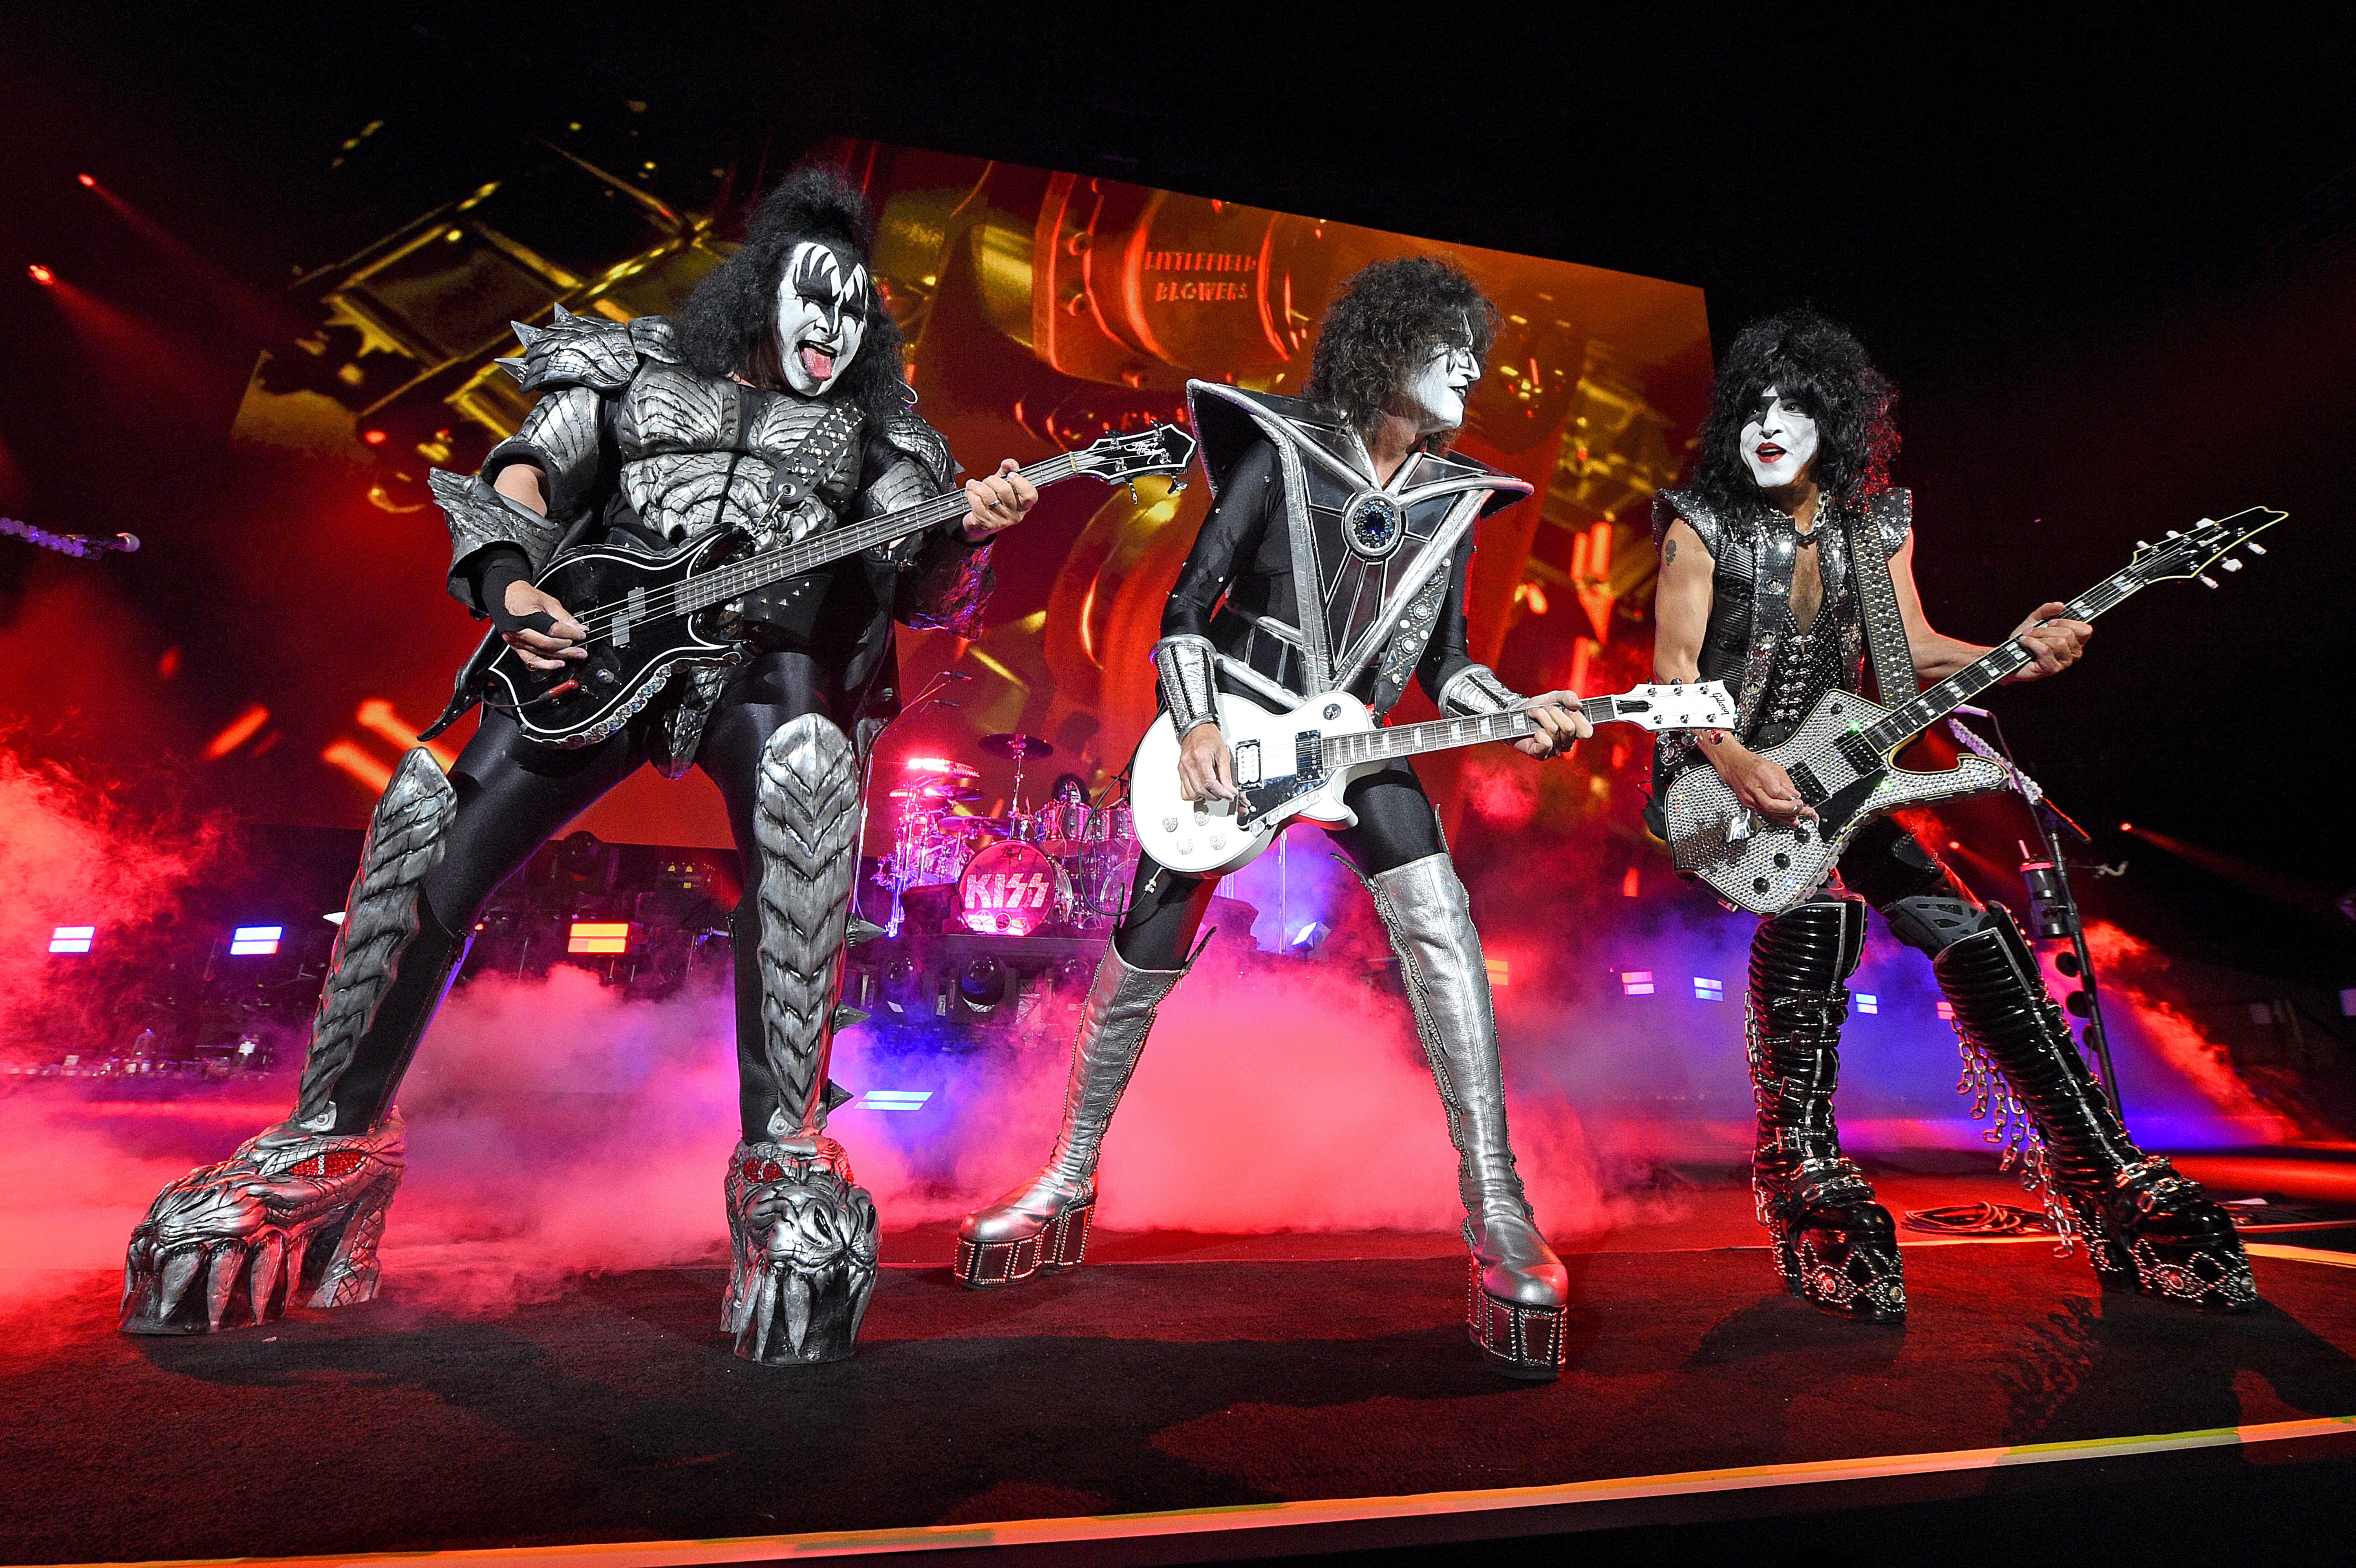 Gene Simmons, Tommy Thayer, and Paul Stanley from KISS performing on stage during the Tribeca Festival screening of "Biography: KISStory" at Battery Park in New York City | Photo: Kevin Mazur/Getty Images for A&E